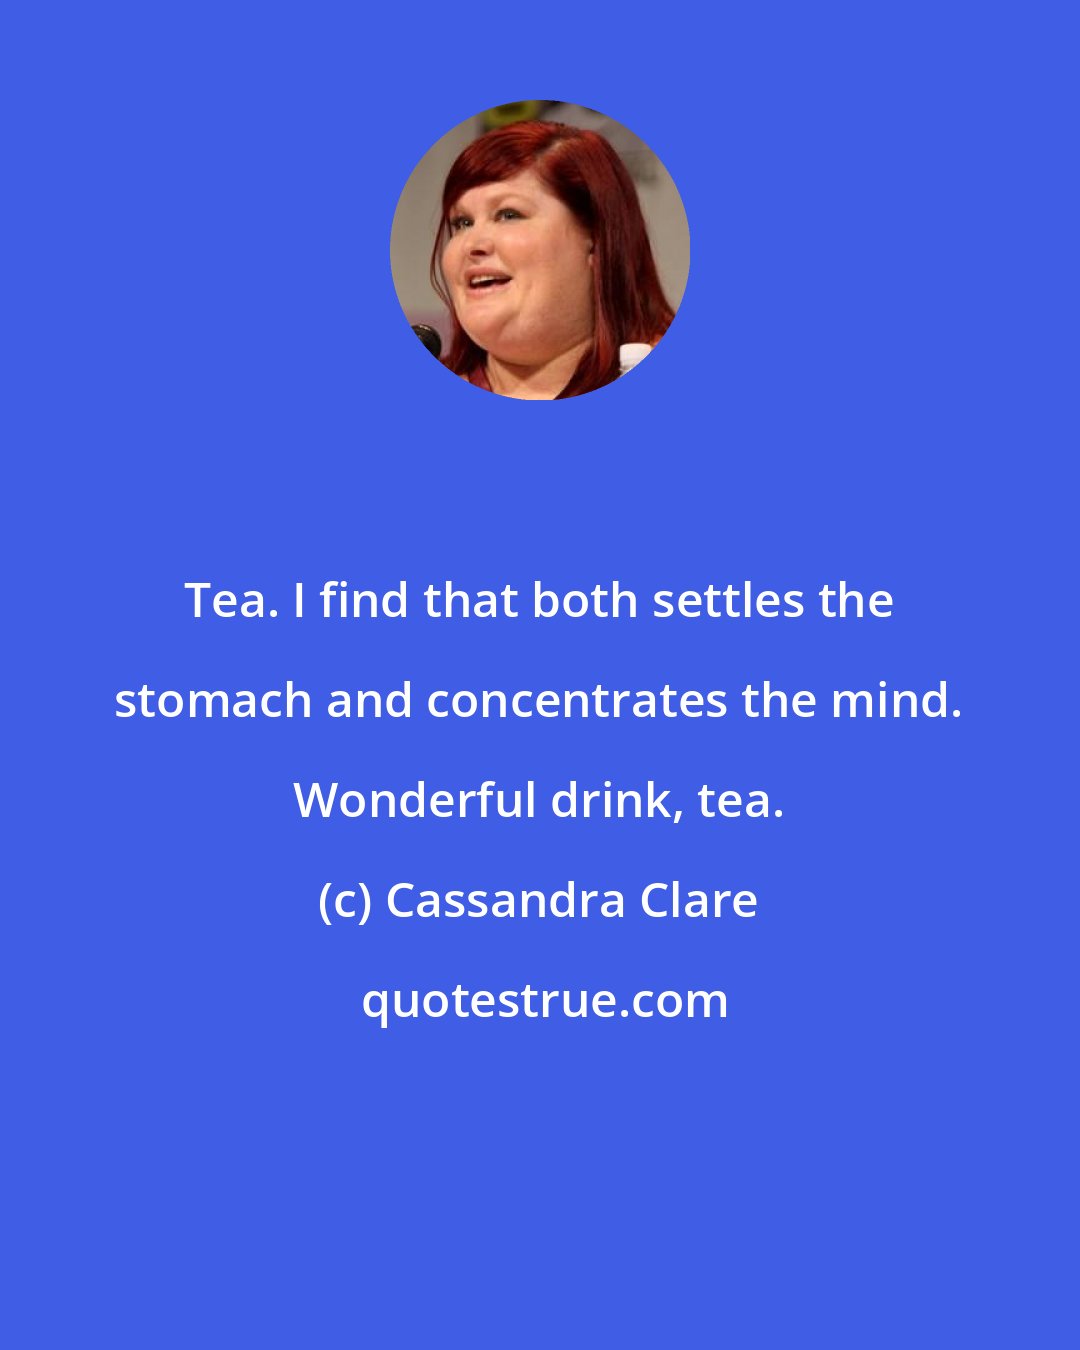 Cassandra Clare: Tea. I find that both settles the stomach and concentrates the mind. Wonderful drink, tea.